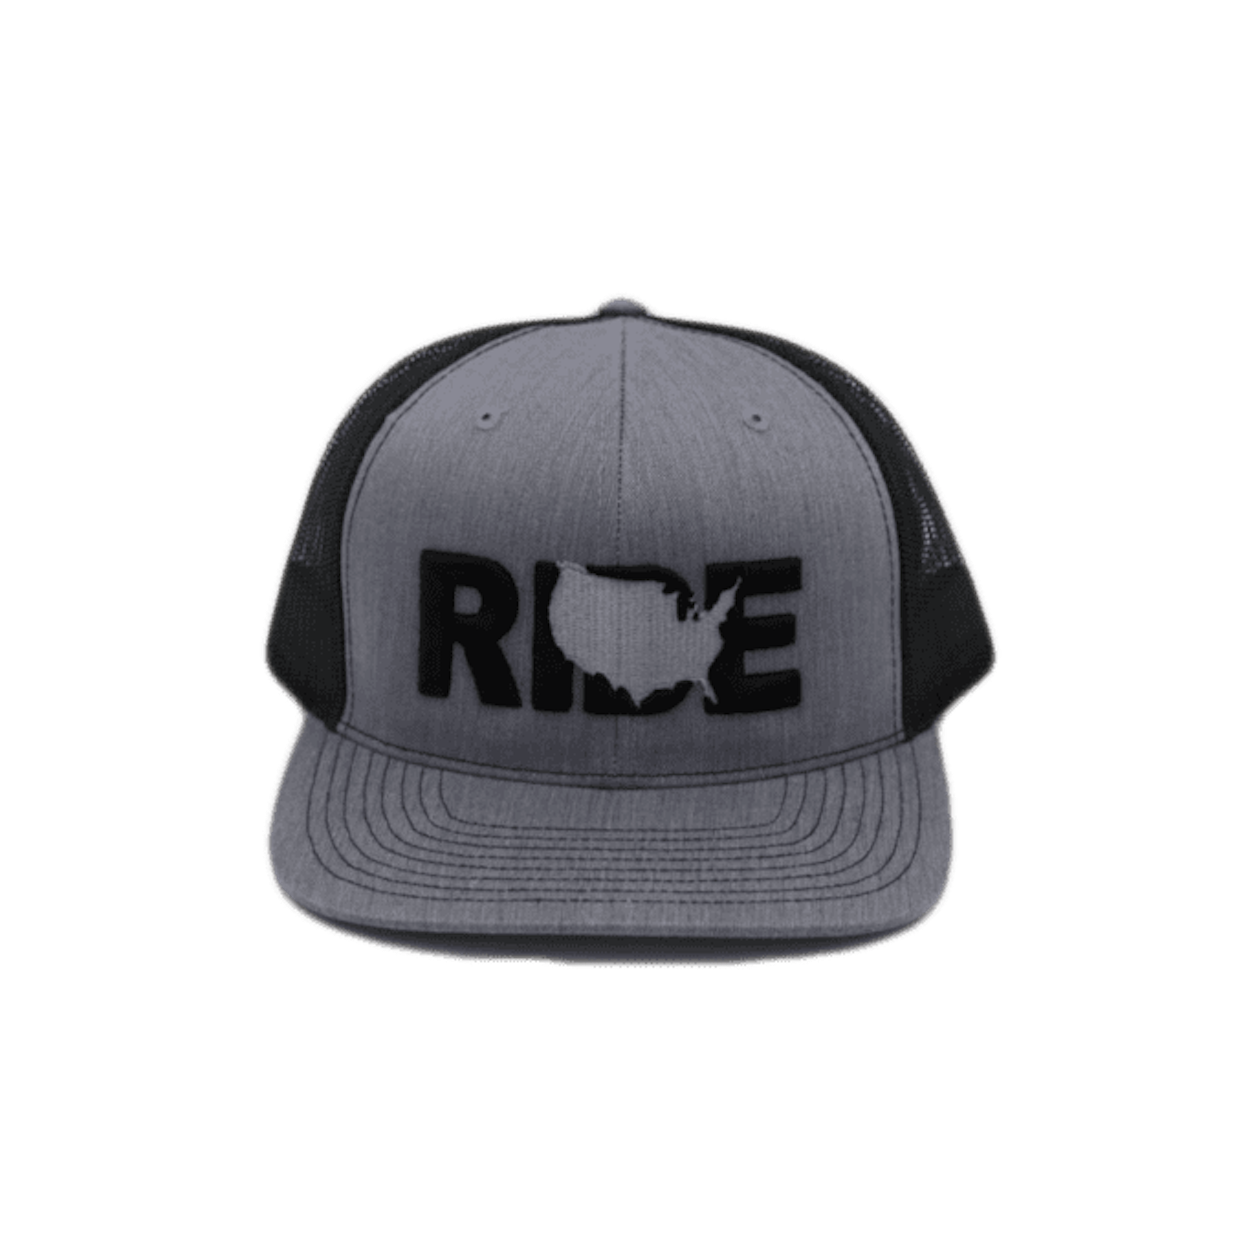 Ride United States Classic Embroidered Snapback Trucker Hat Heather Gray/Black